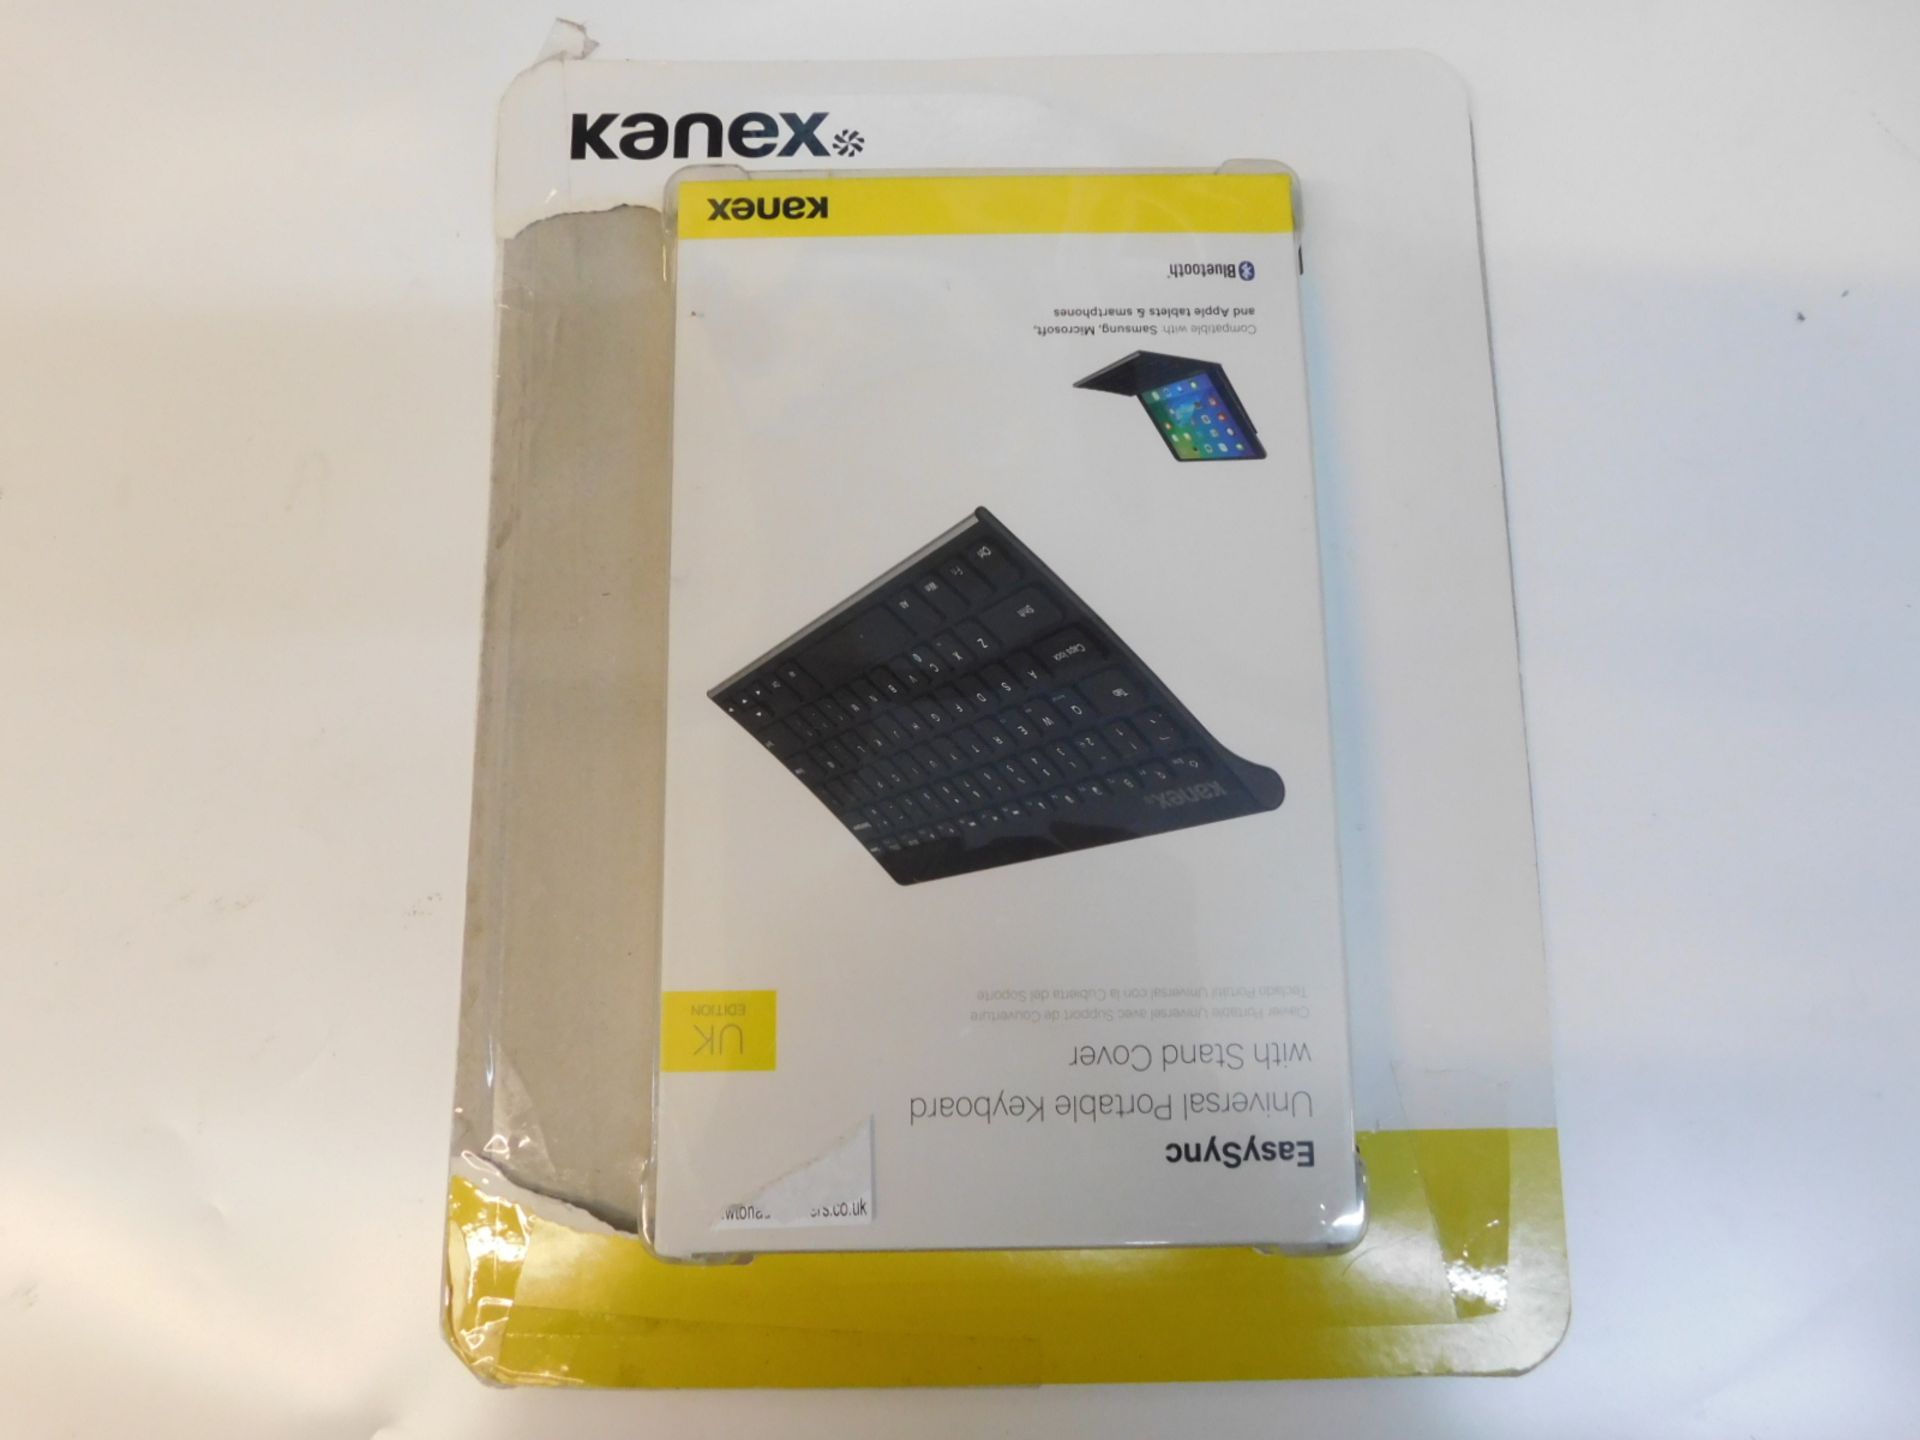 1 PACK OF KANEX EASY SYNC UNIVERSAL PORTABLE KEYBOARD WITH COVER RRP Â£49.99